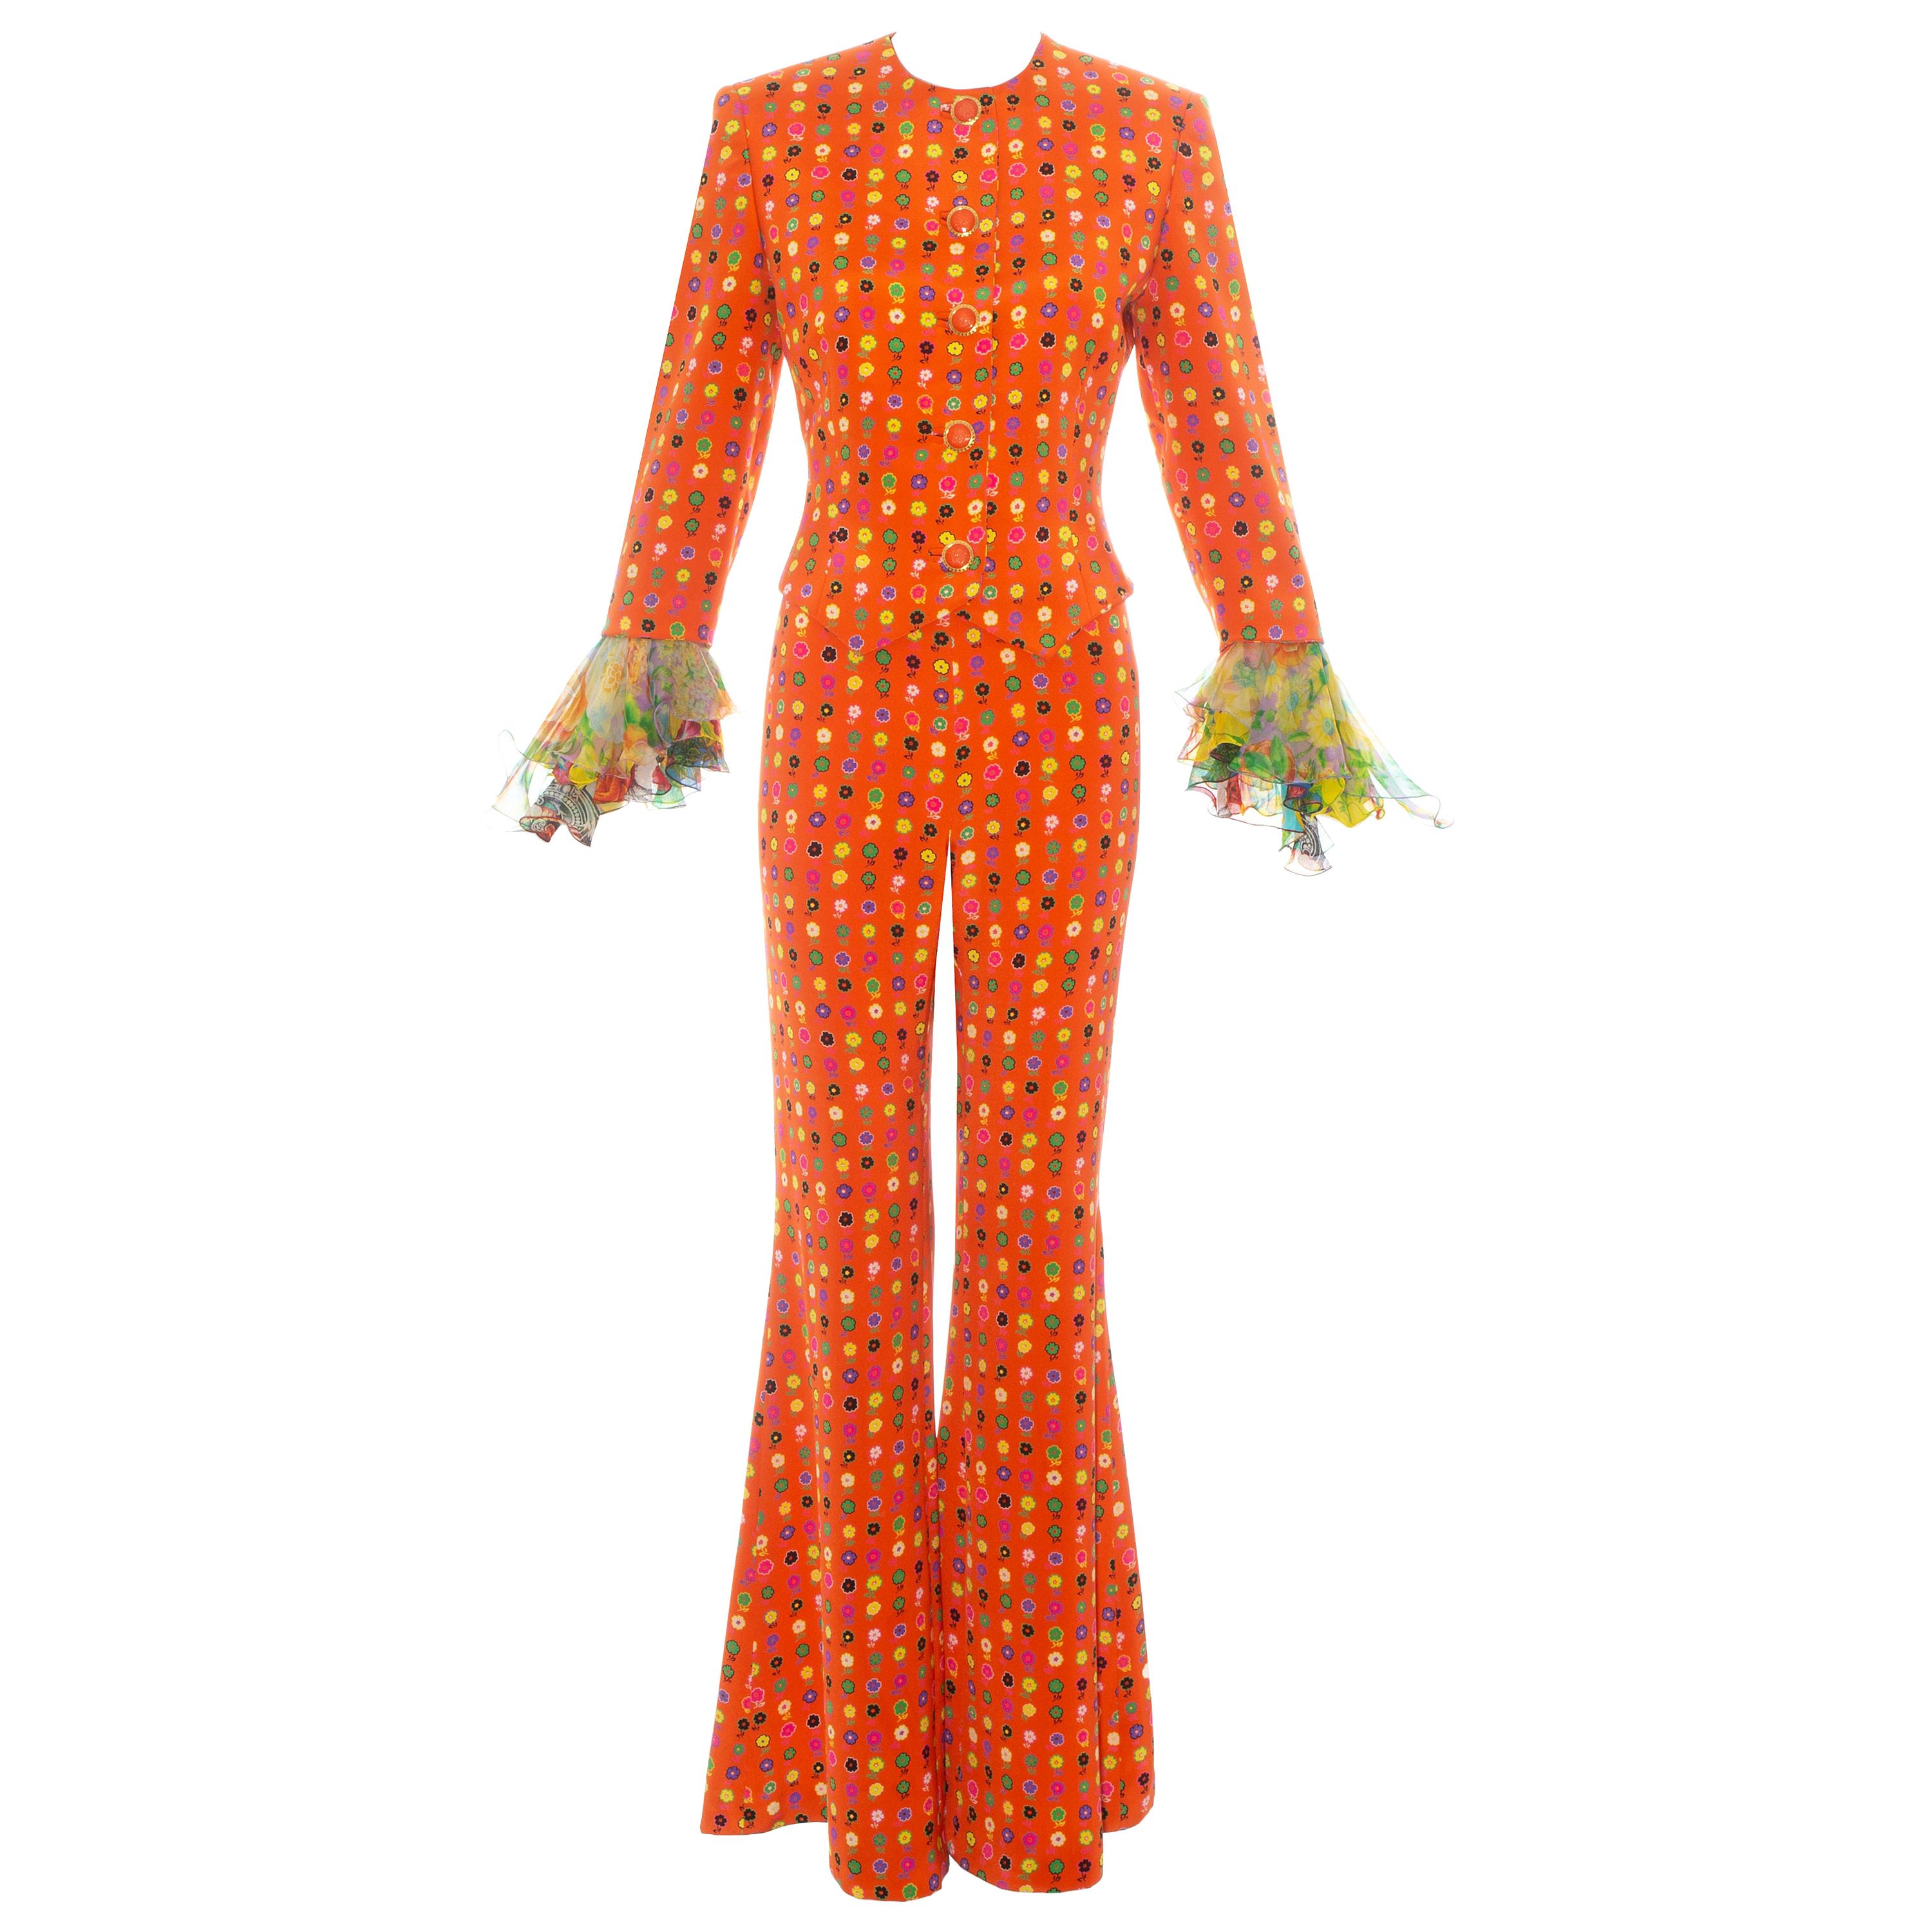 Gianni Versace orange floral printed silk flared pant suit, ss 1993 For Sale